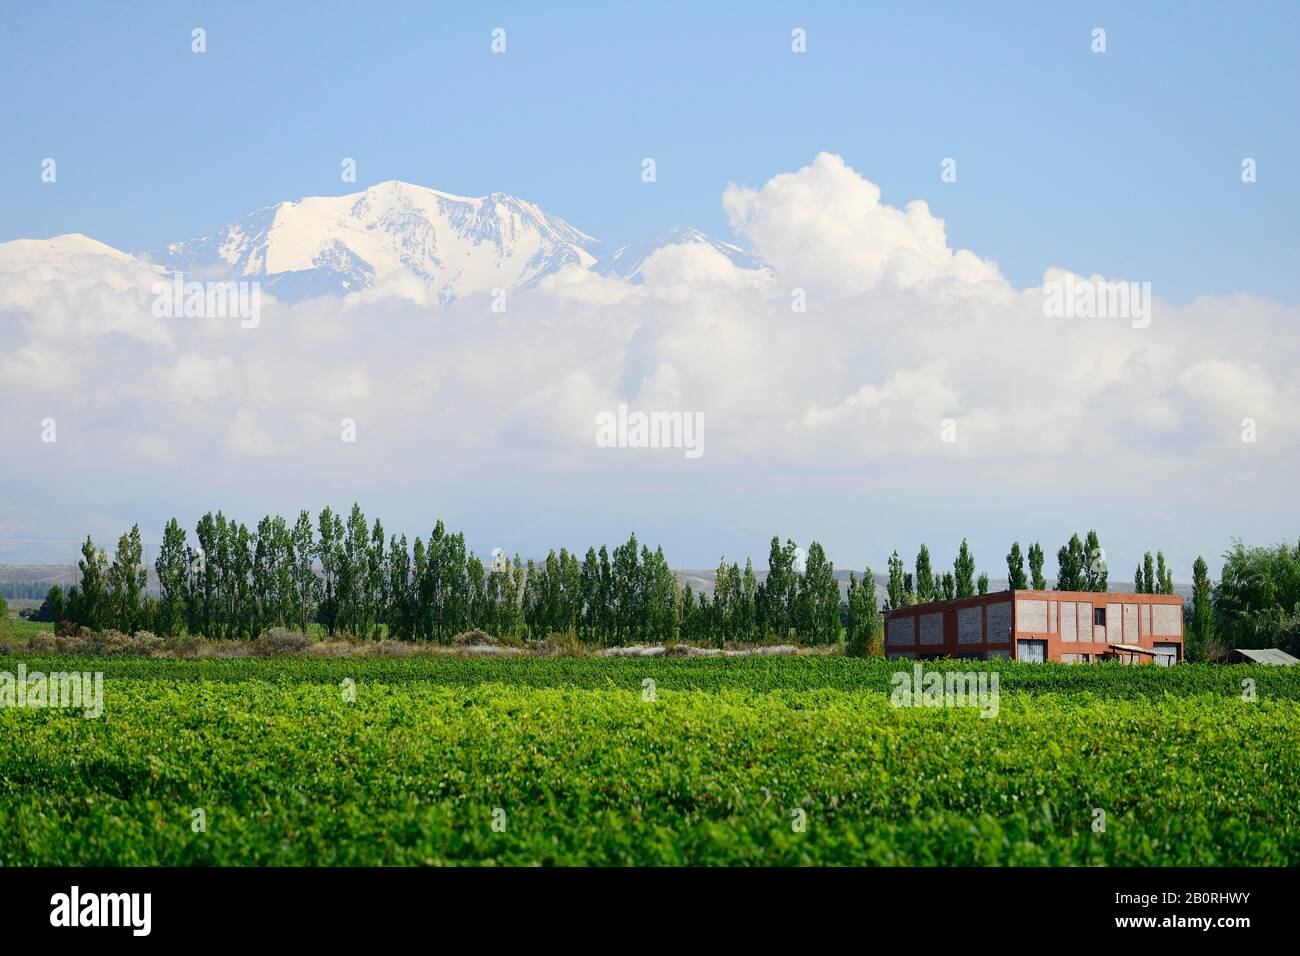 Simple cellar building in the vineyard, in the back Andes with Aconcagua, near Mendoza, Mendoza Province, Argentina Stock Photo